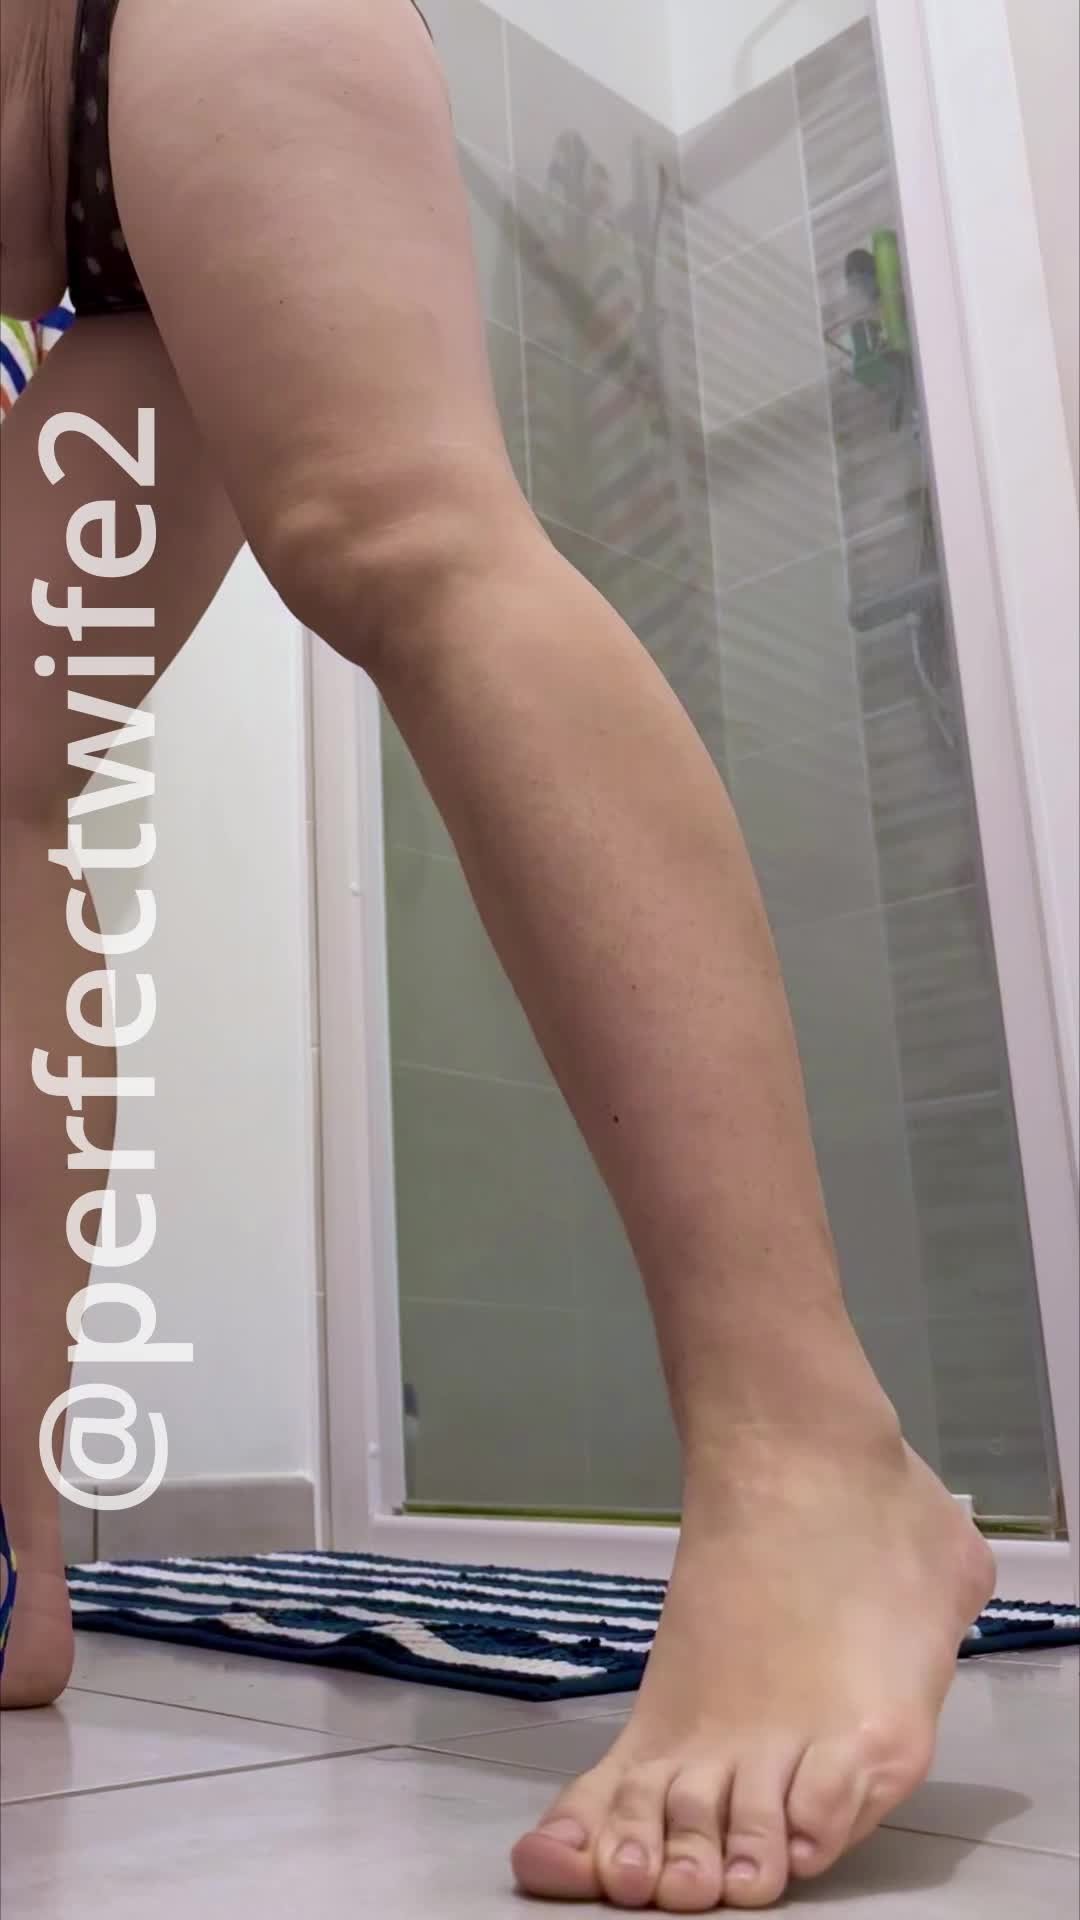 Video post by Perfectwife2